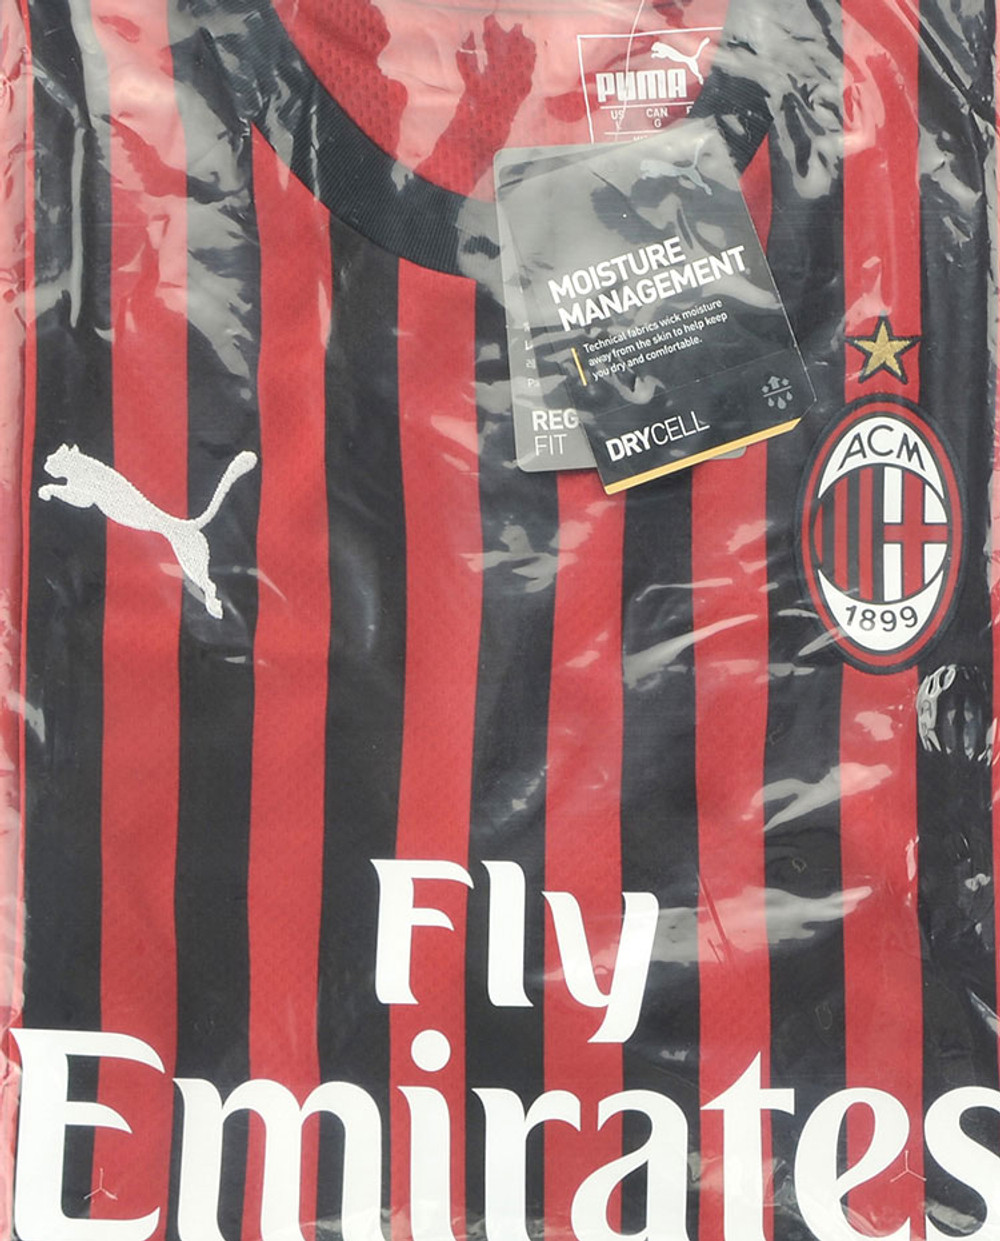 2019-20 AC Milan Home Shirt *BNIB*-AC Milan Featured Products View All Clearance New Clearance Best Sellers Permanent Price Drops